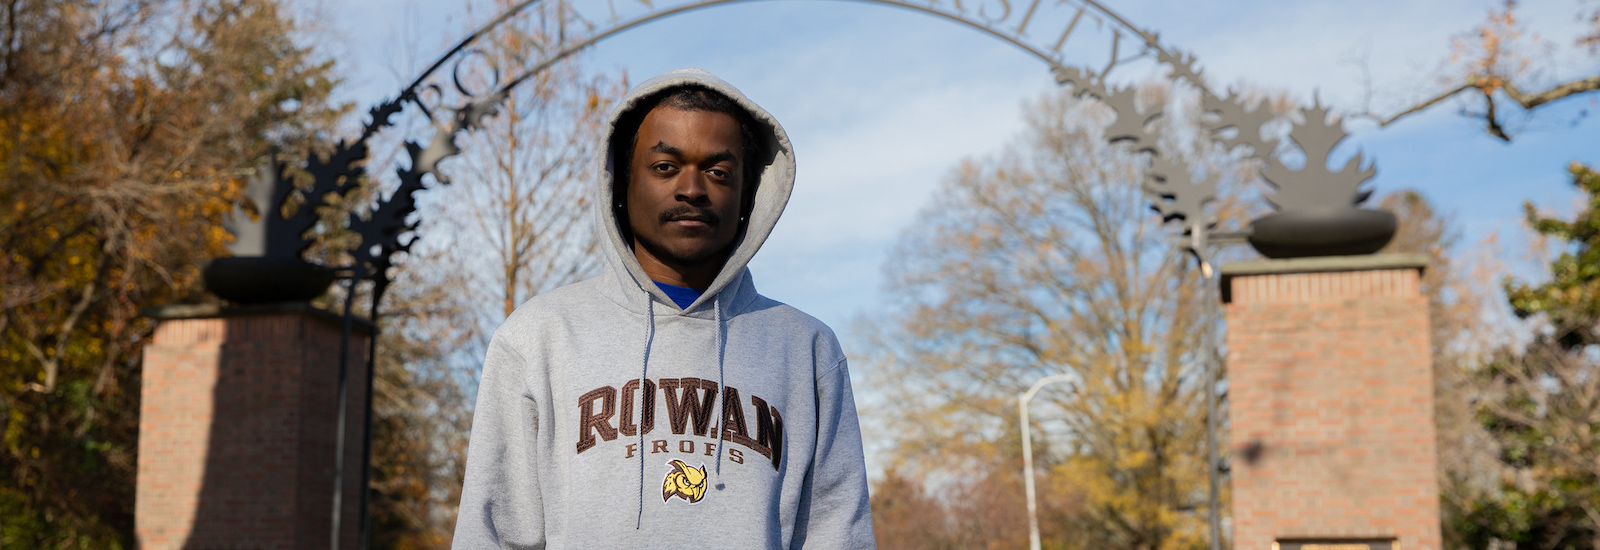 Rowan University Law and Justice major Keshawn Porter stands in front of the Rowan arch.